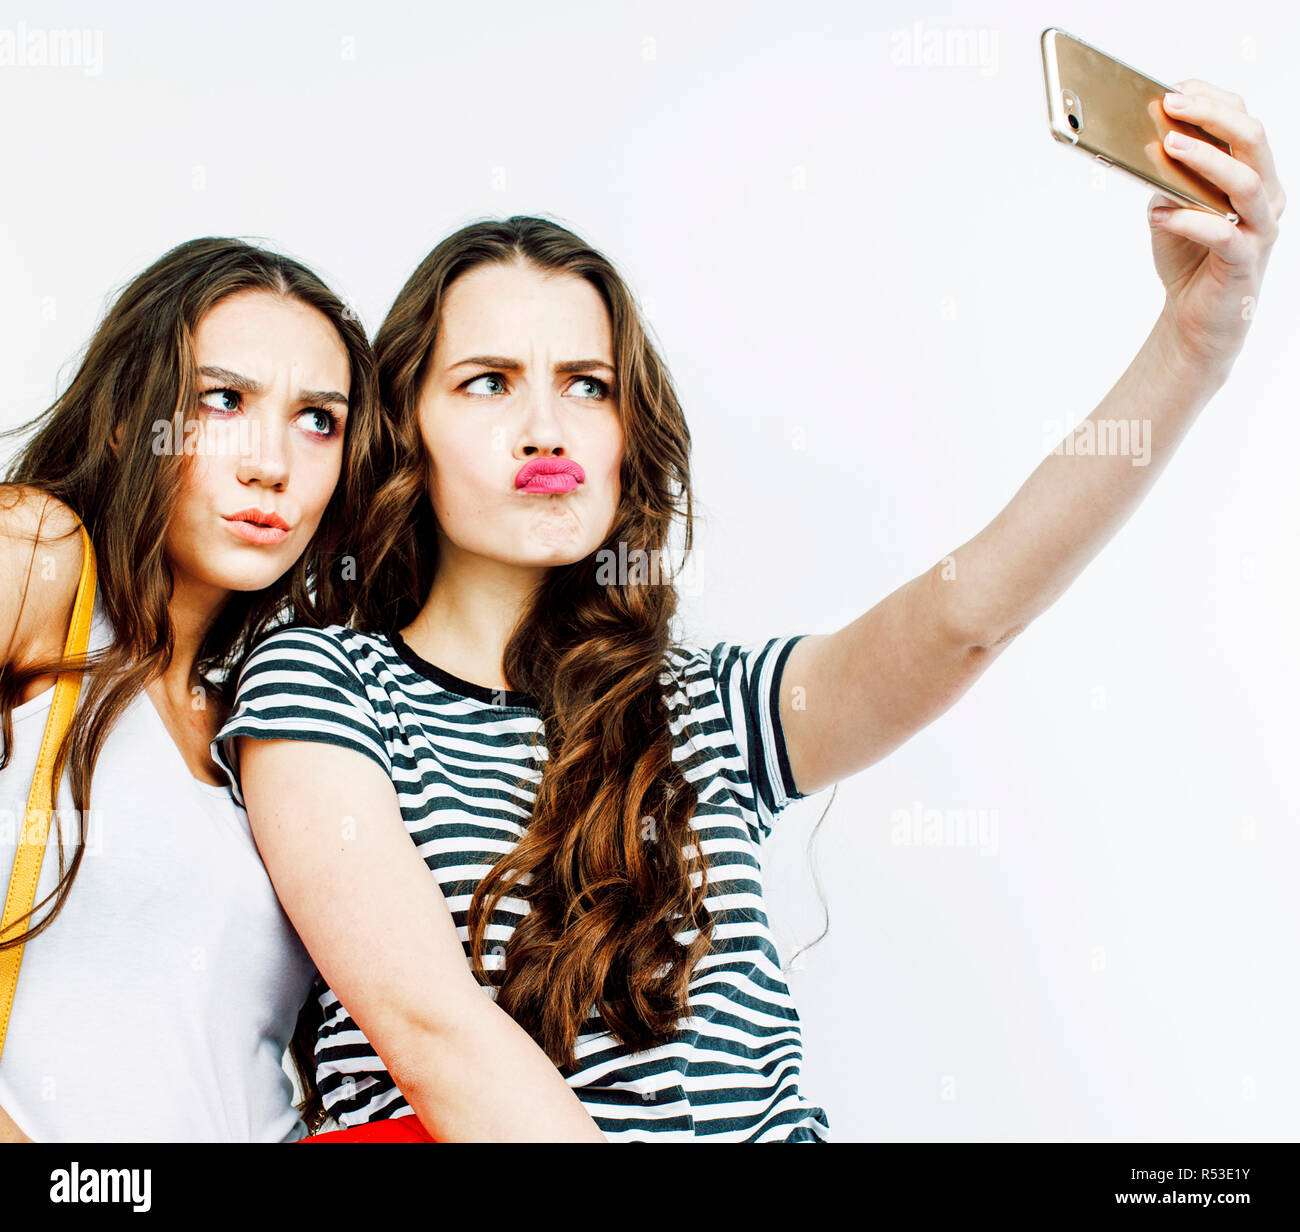 two best friends teenage girls together having fun posing emotional on white background besties happy smiling making selfie lifestyle people conce R53E1Y